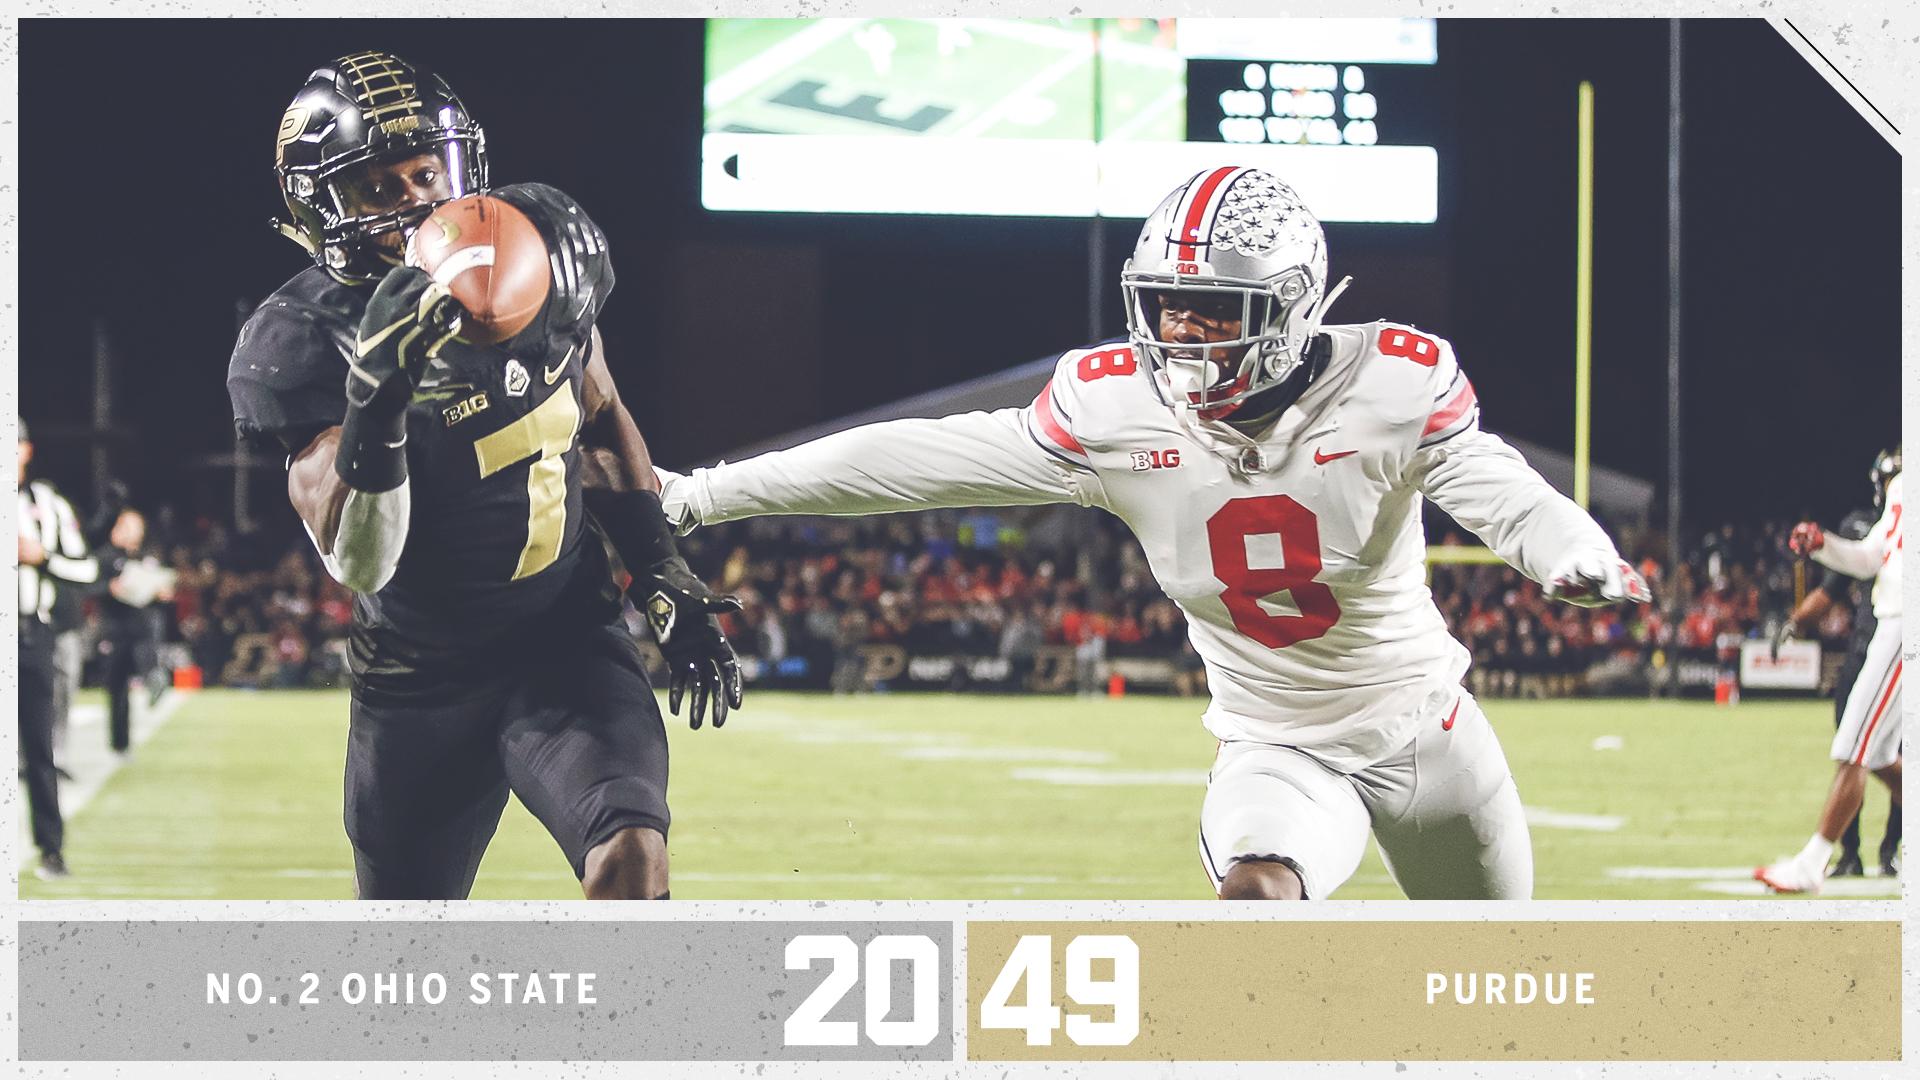 ESPN on Twitter "DOWN GO THE BUCKEYES! Purdue gets the HUGE win at